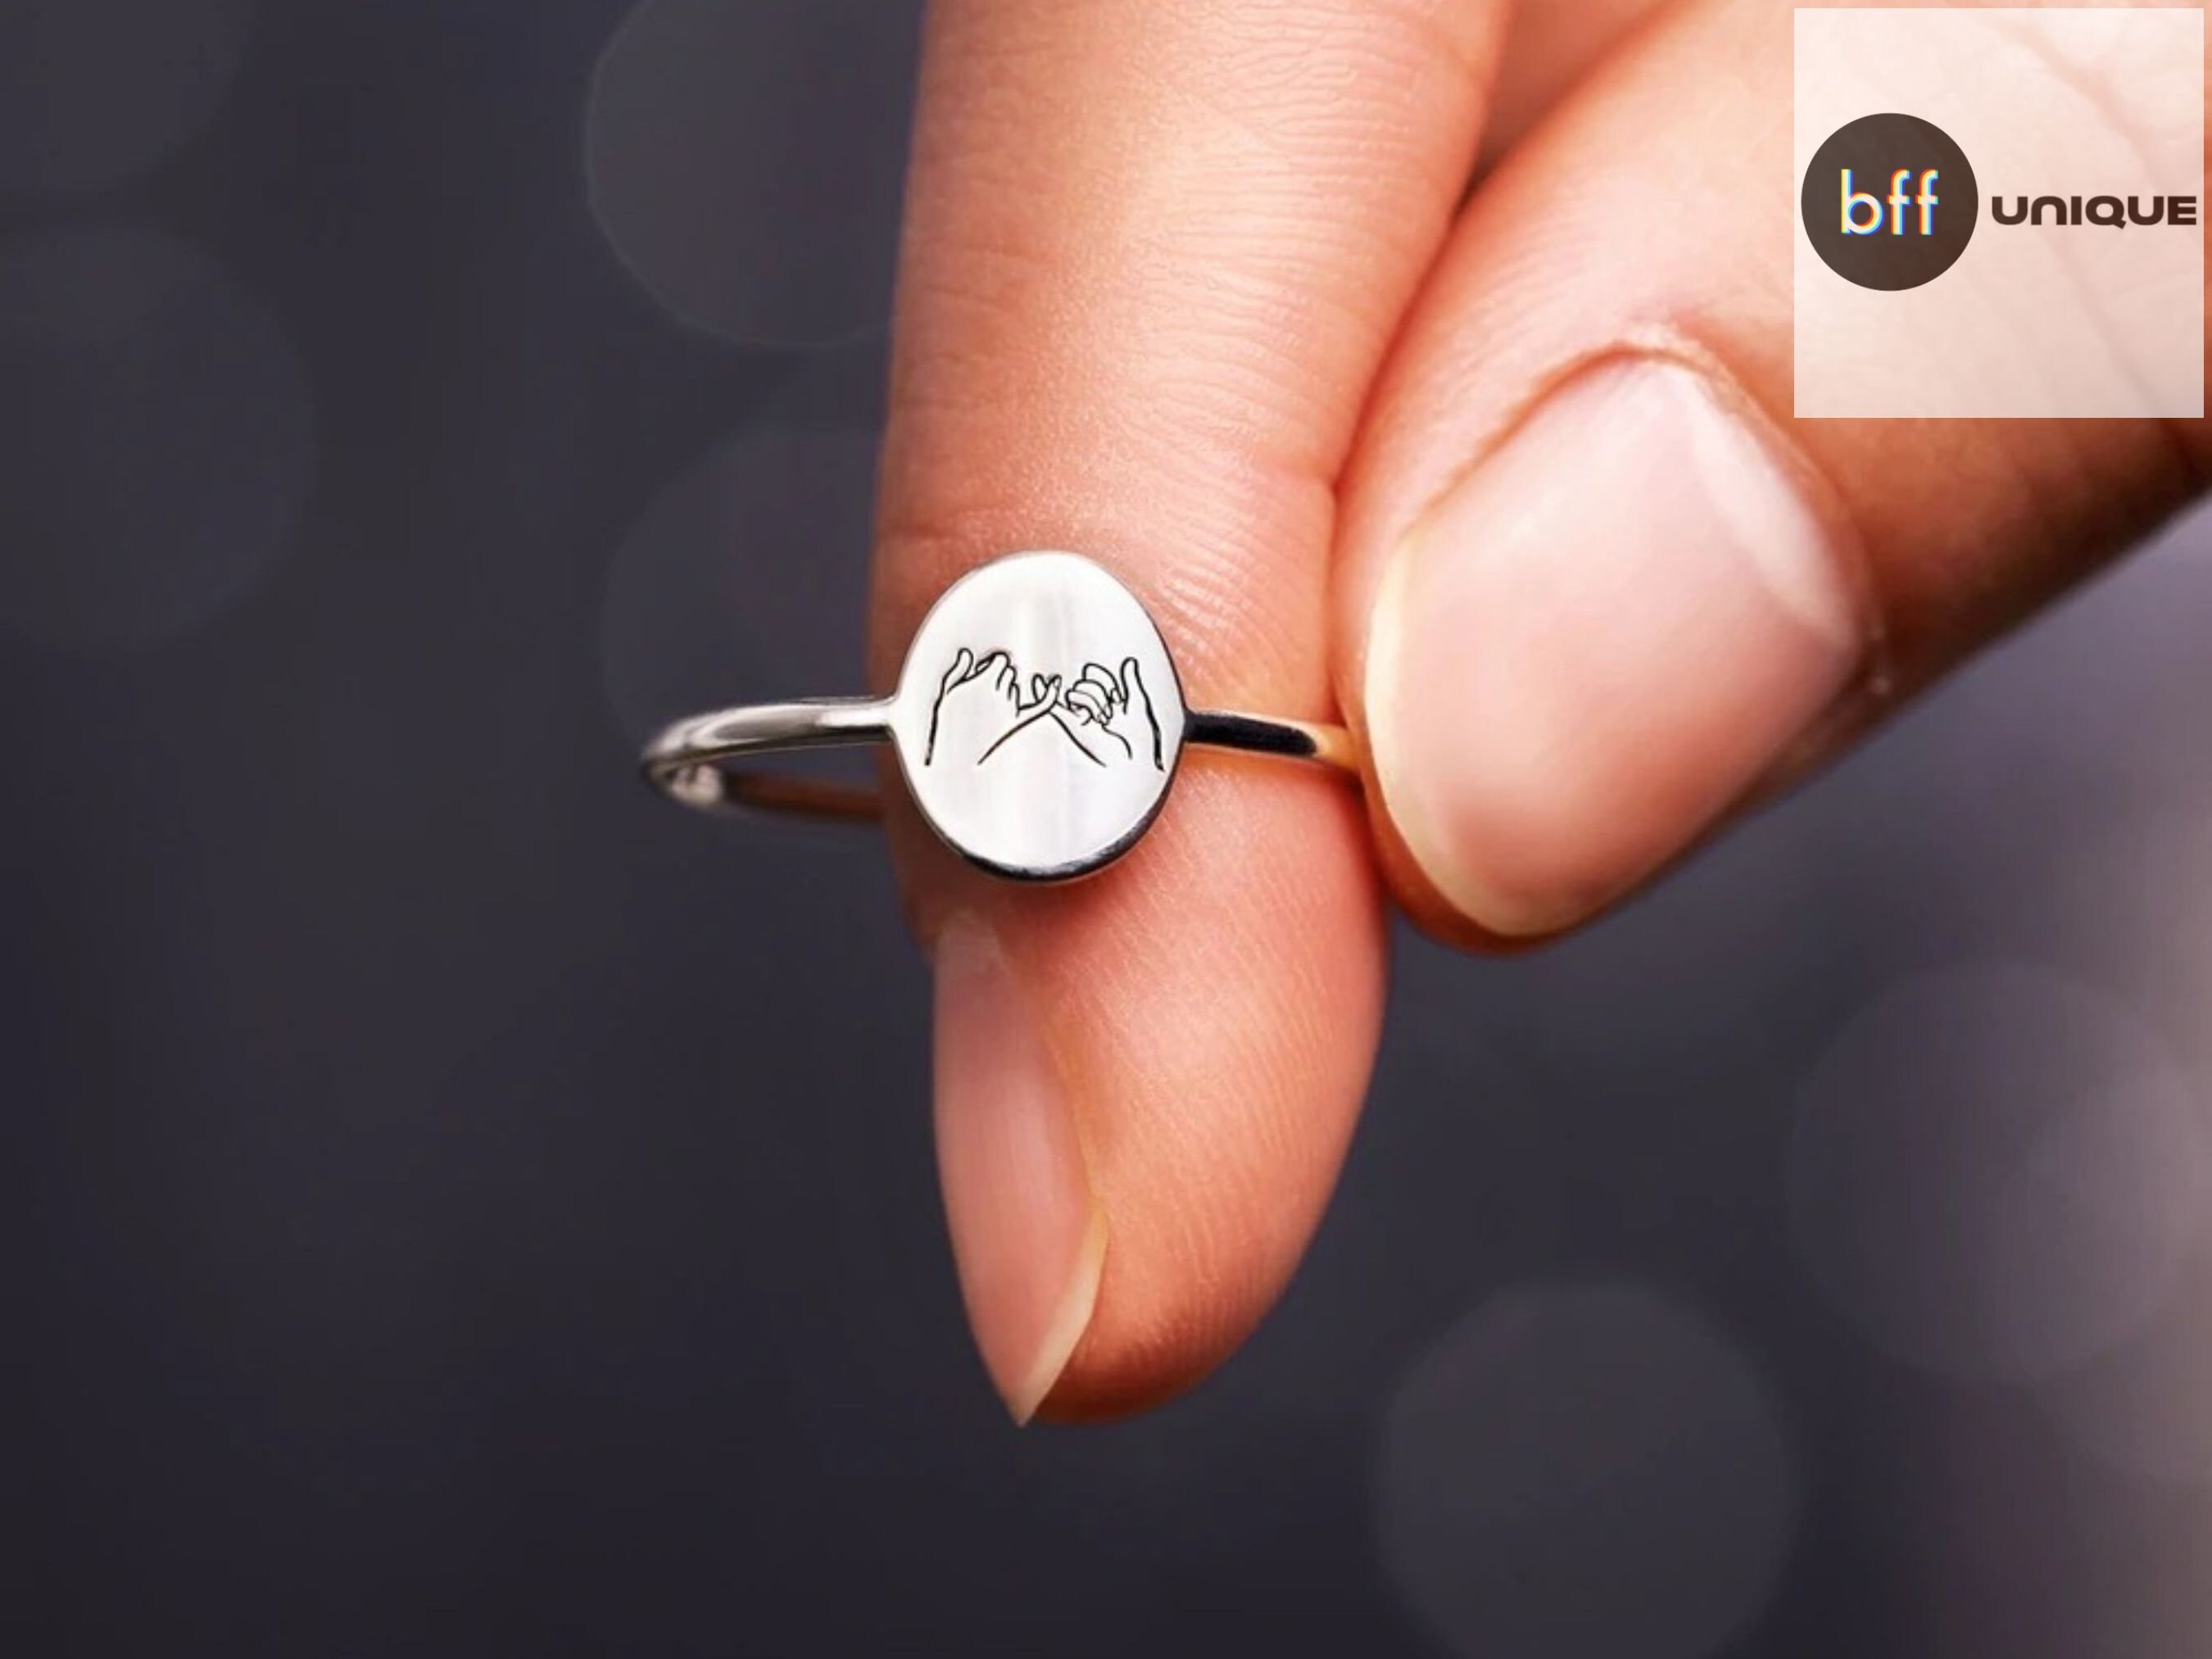 LParkin Friendship Gifts Best Friend Rings for 2 Cute Keyring You